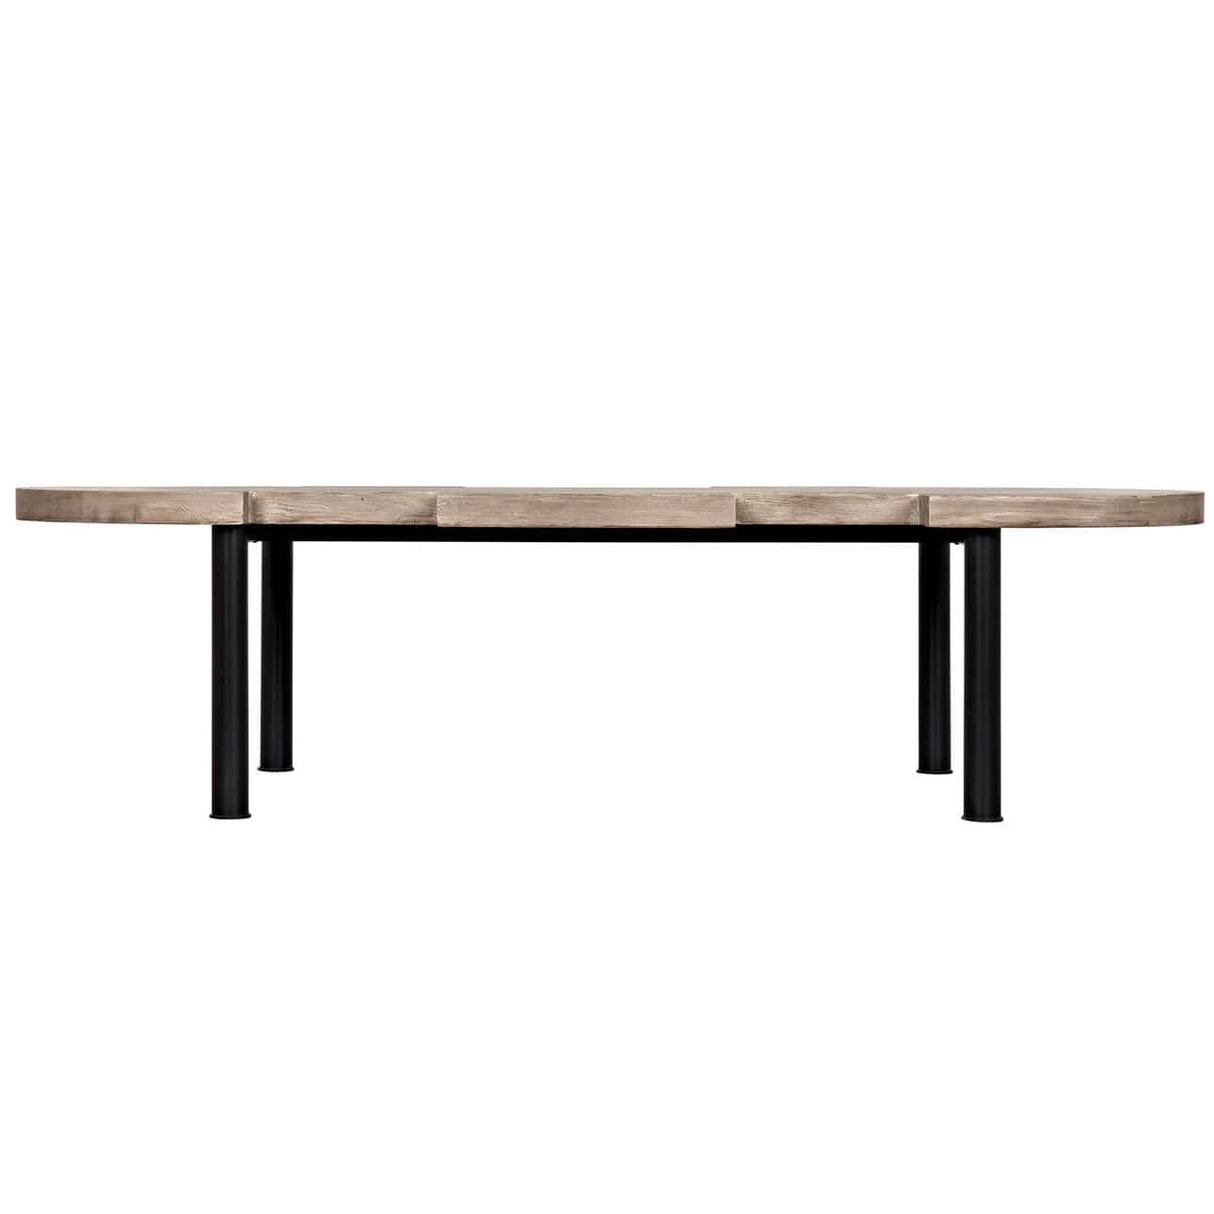 CFC Puzzle Coffee Table - HOLD FOR PRICING Coffee Tables cfc-OW392